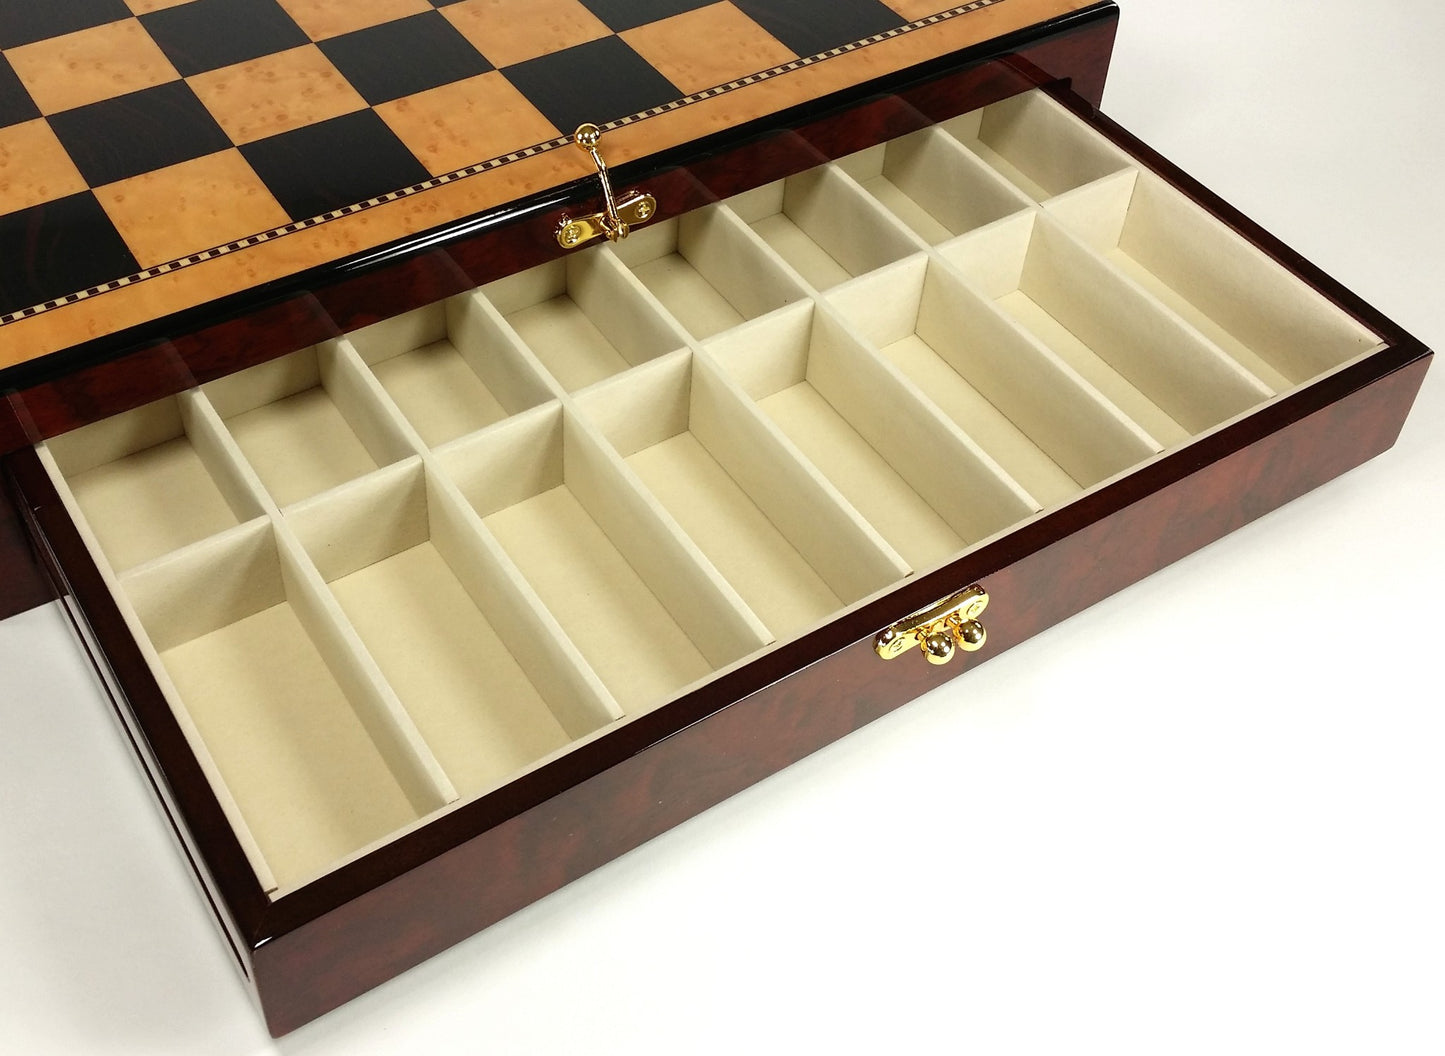 Medieval Times Crusades King Richard Chess Set Walnut Maple Color Storage Board